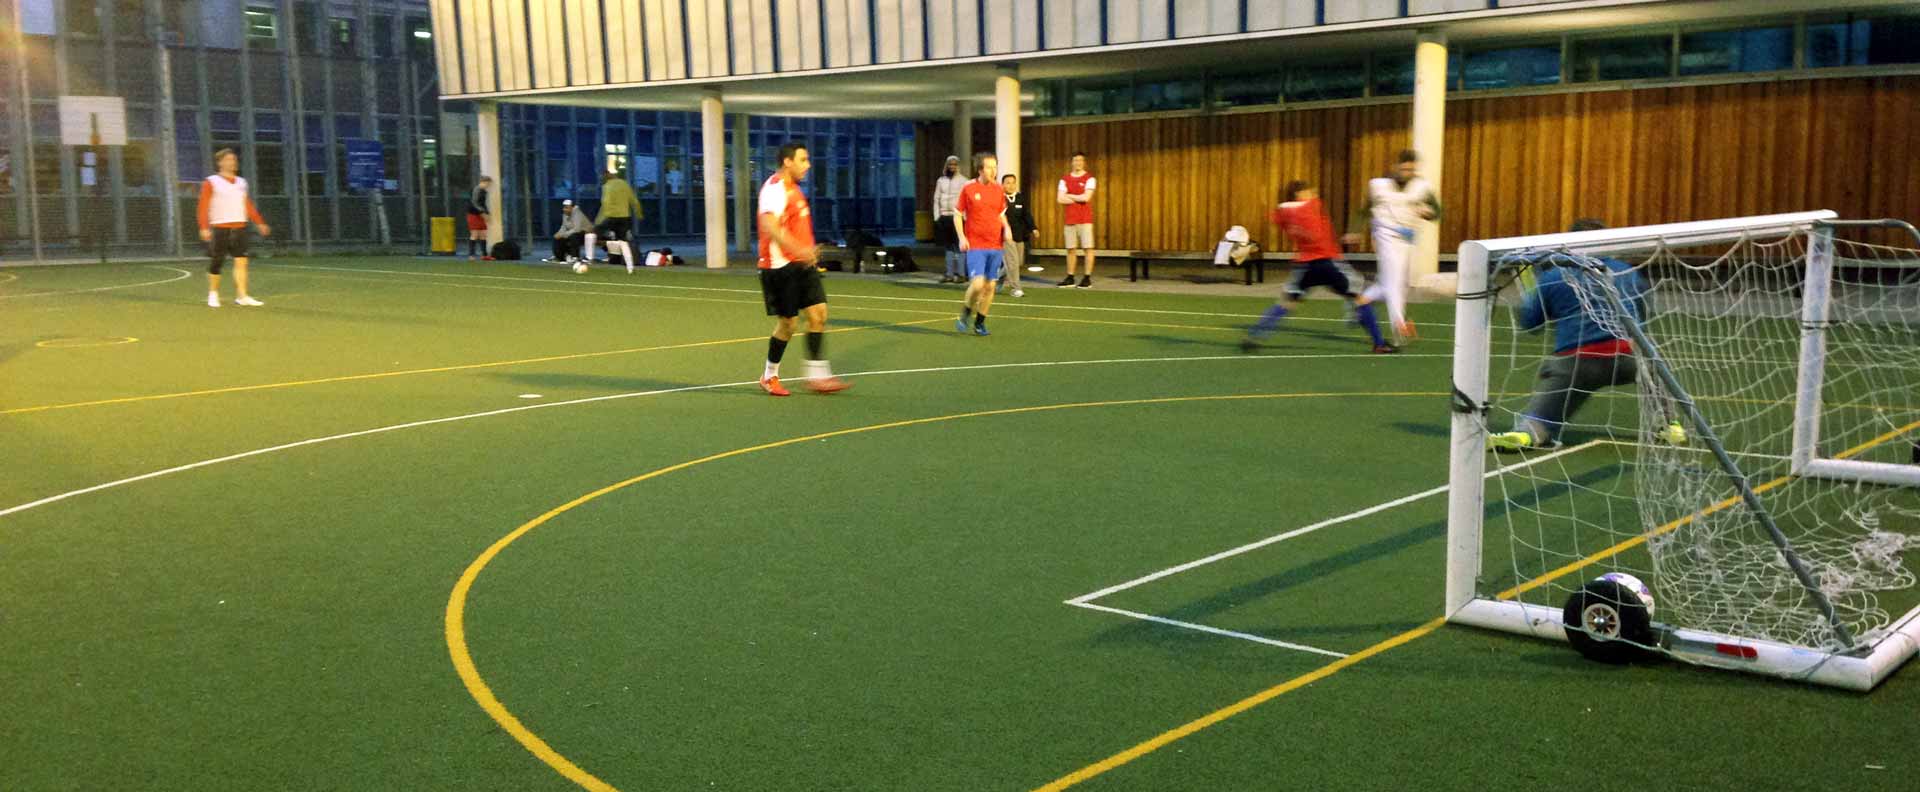 Players playing 5-a-side football